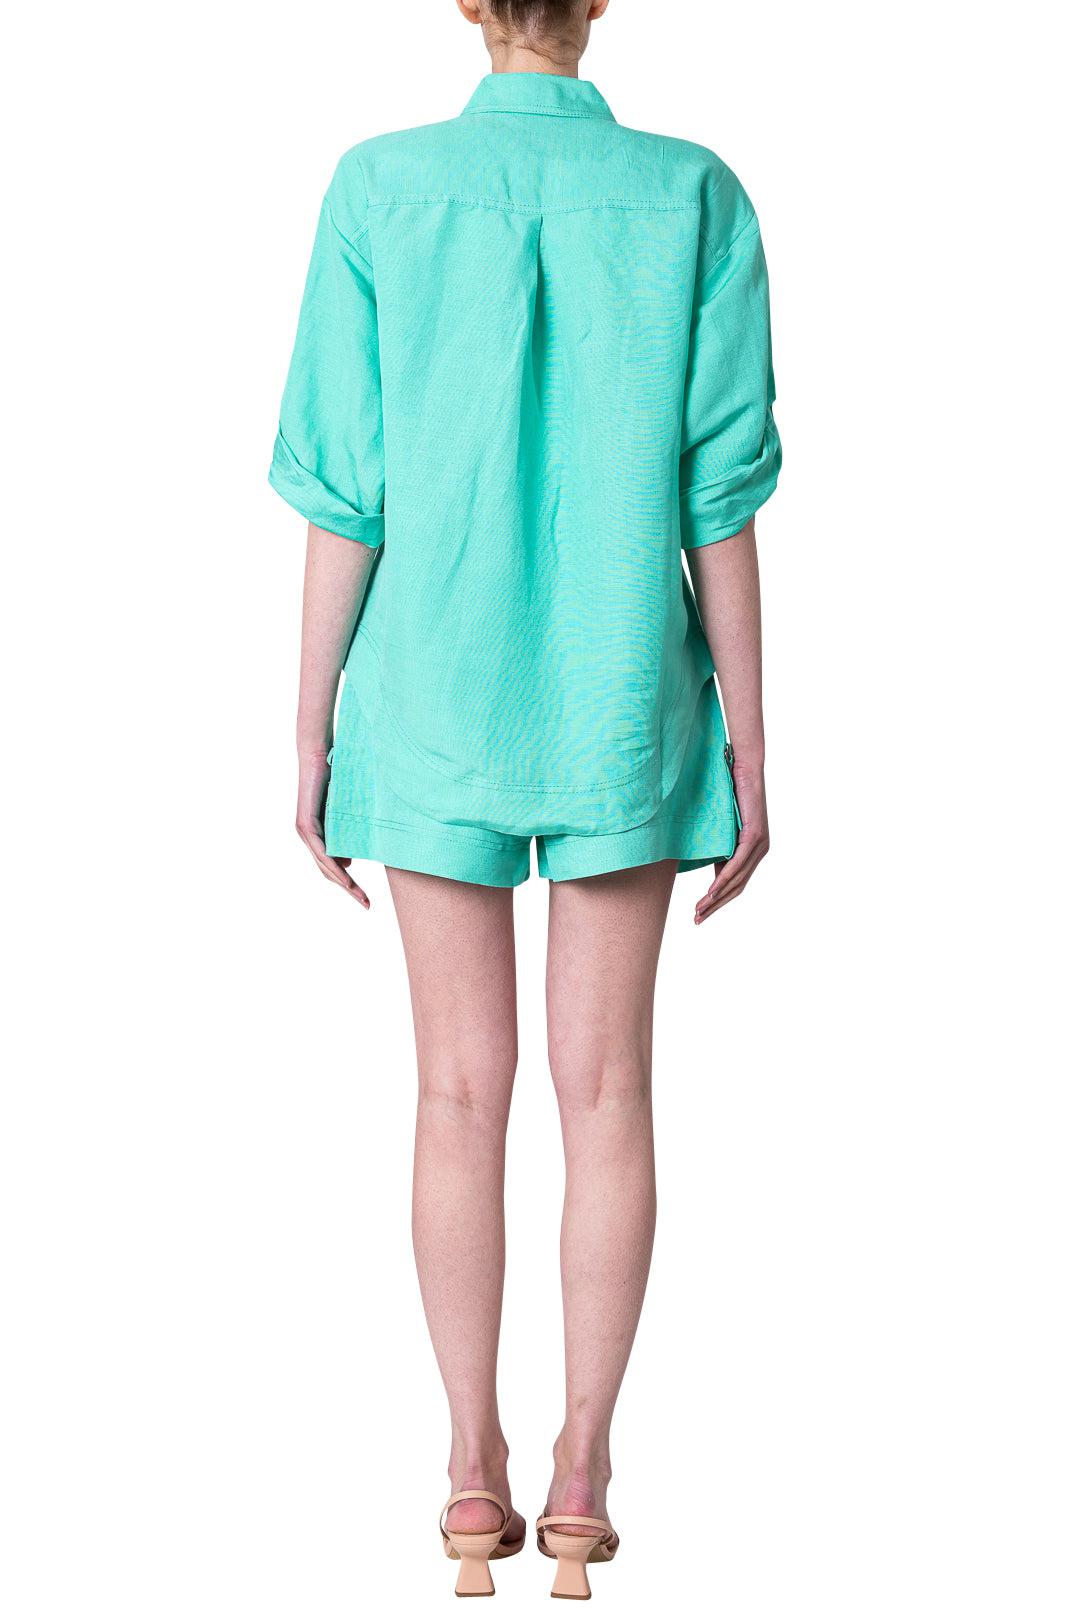 Aje-Oversized Shirt-dgallerystore